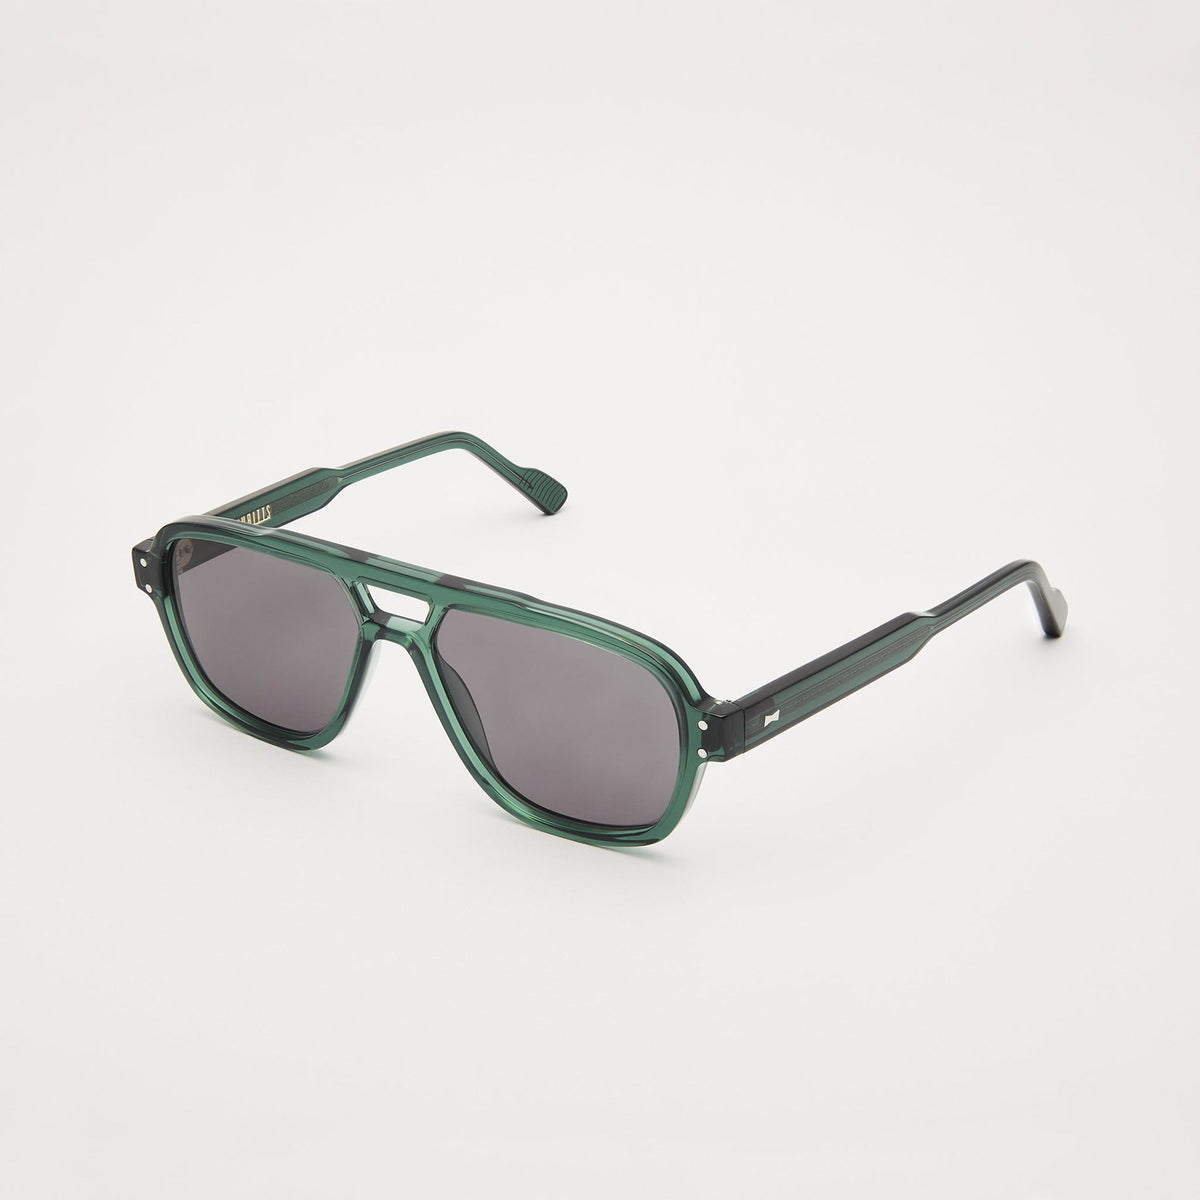 Emerald Cubitts Earlsferry sunglasses